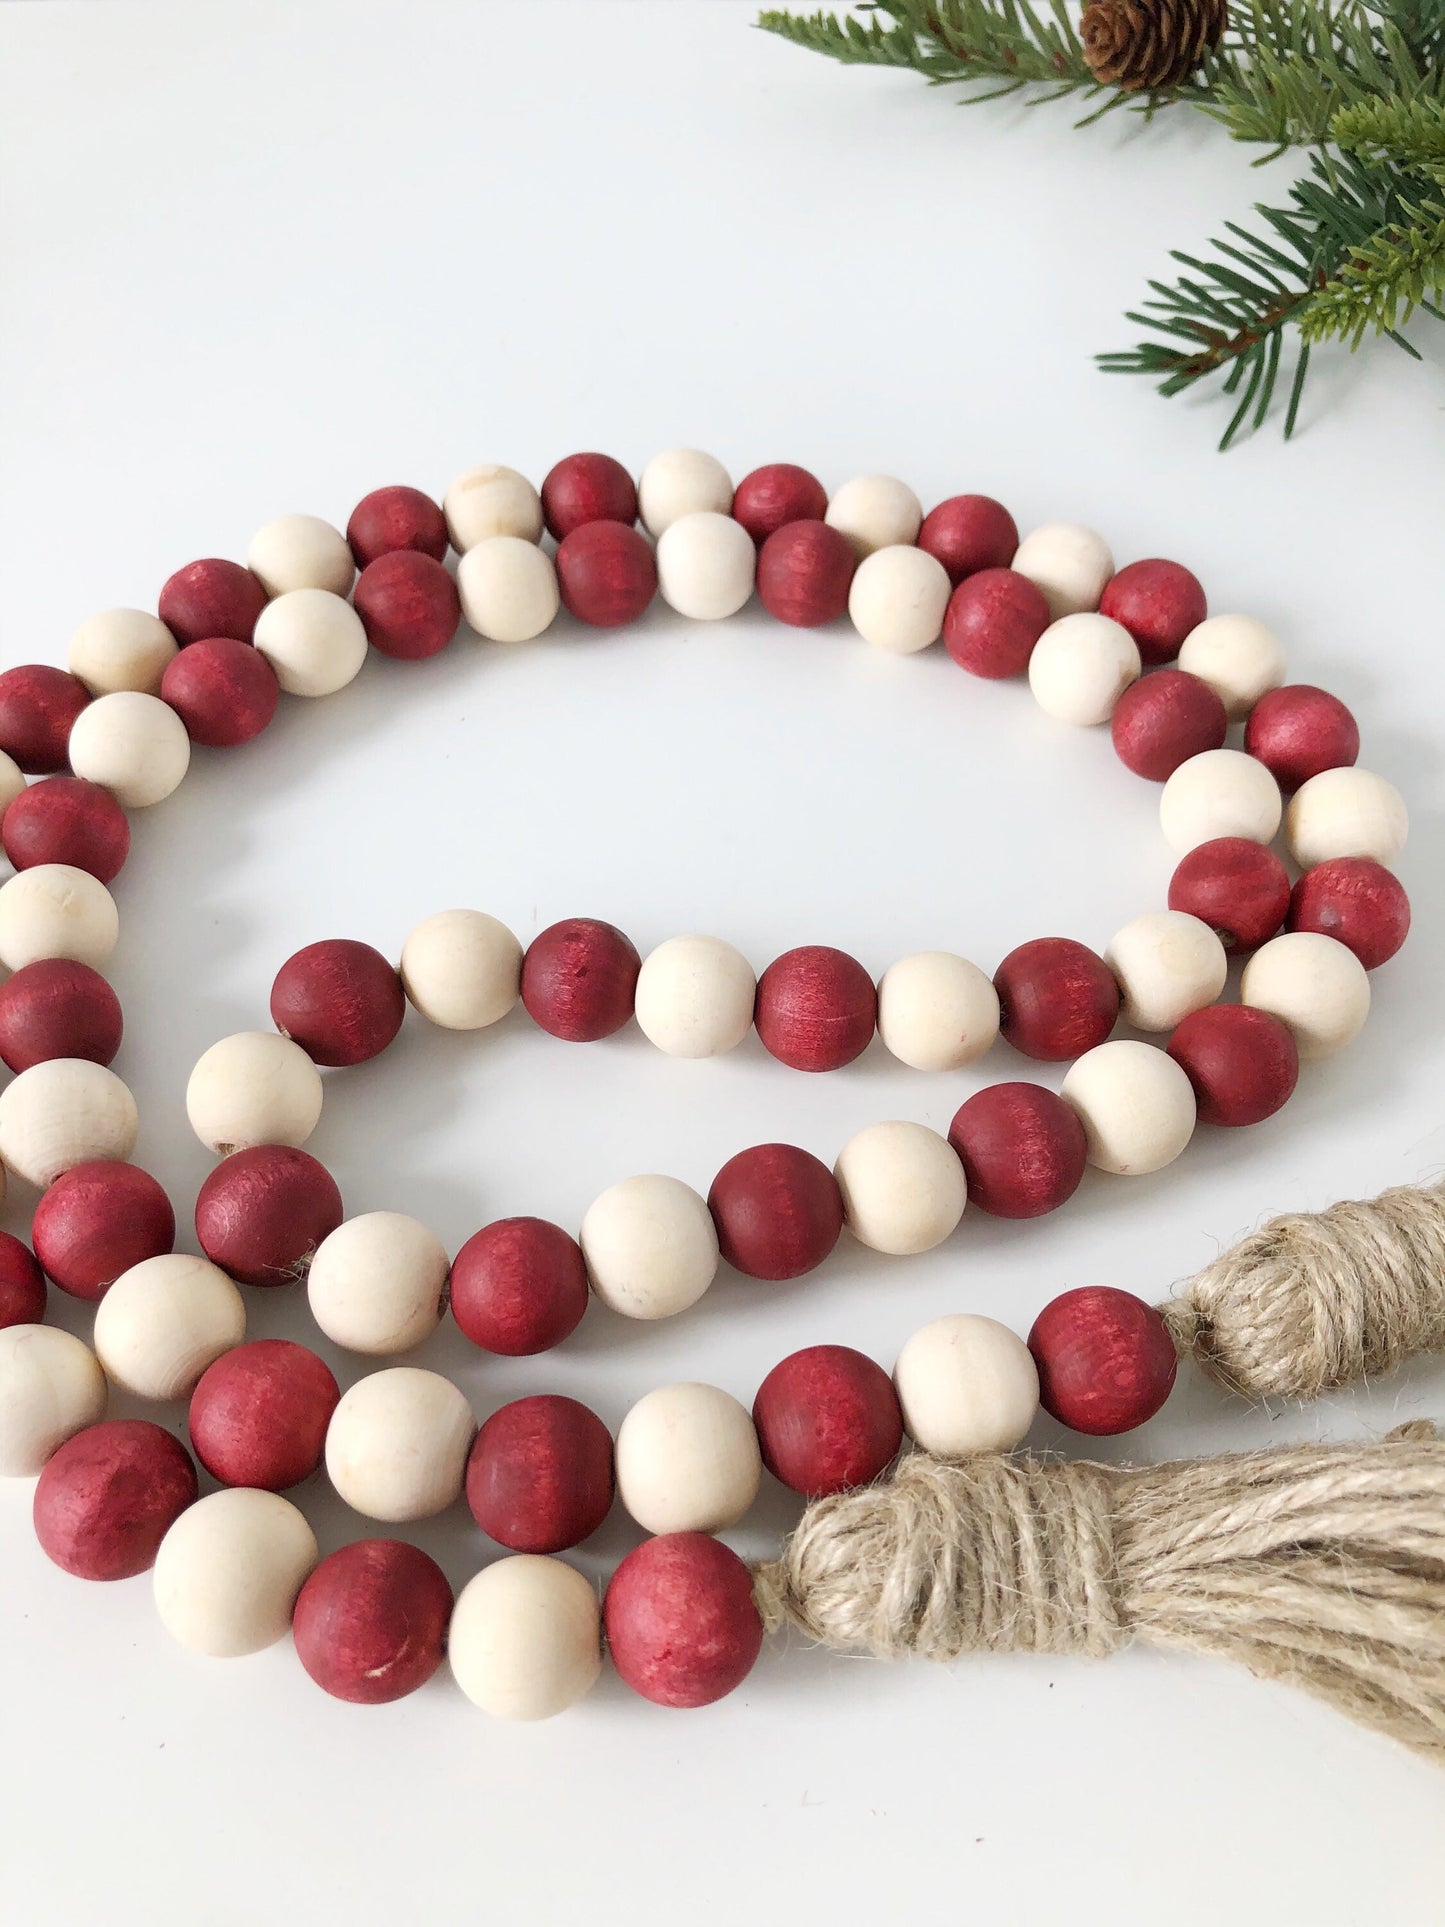 Red and White Wood Bead Garland, Red and White Farmhouse Decor, Tiered Tray Decor